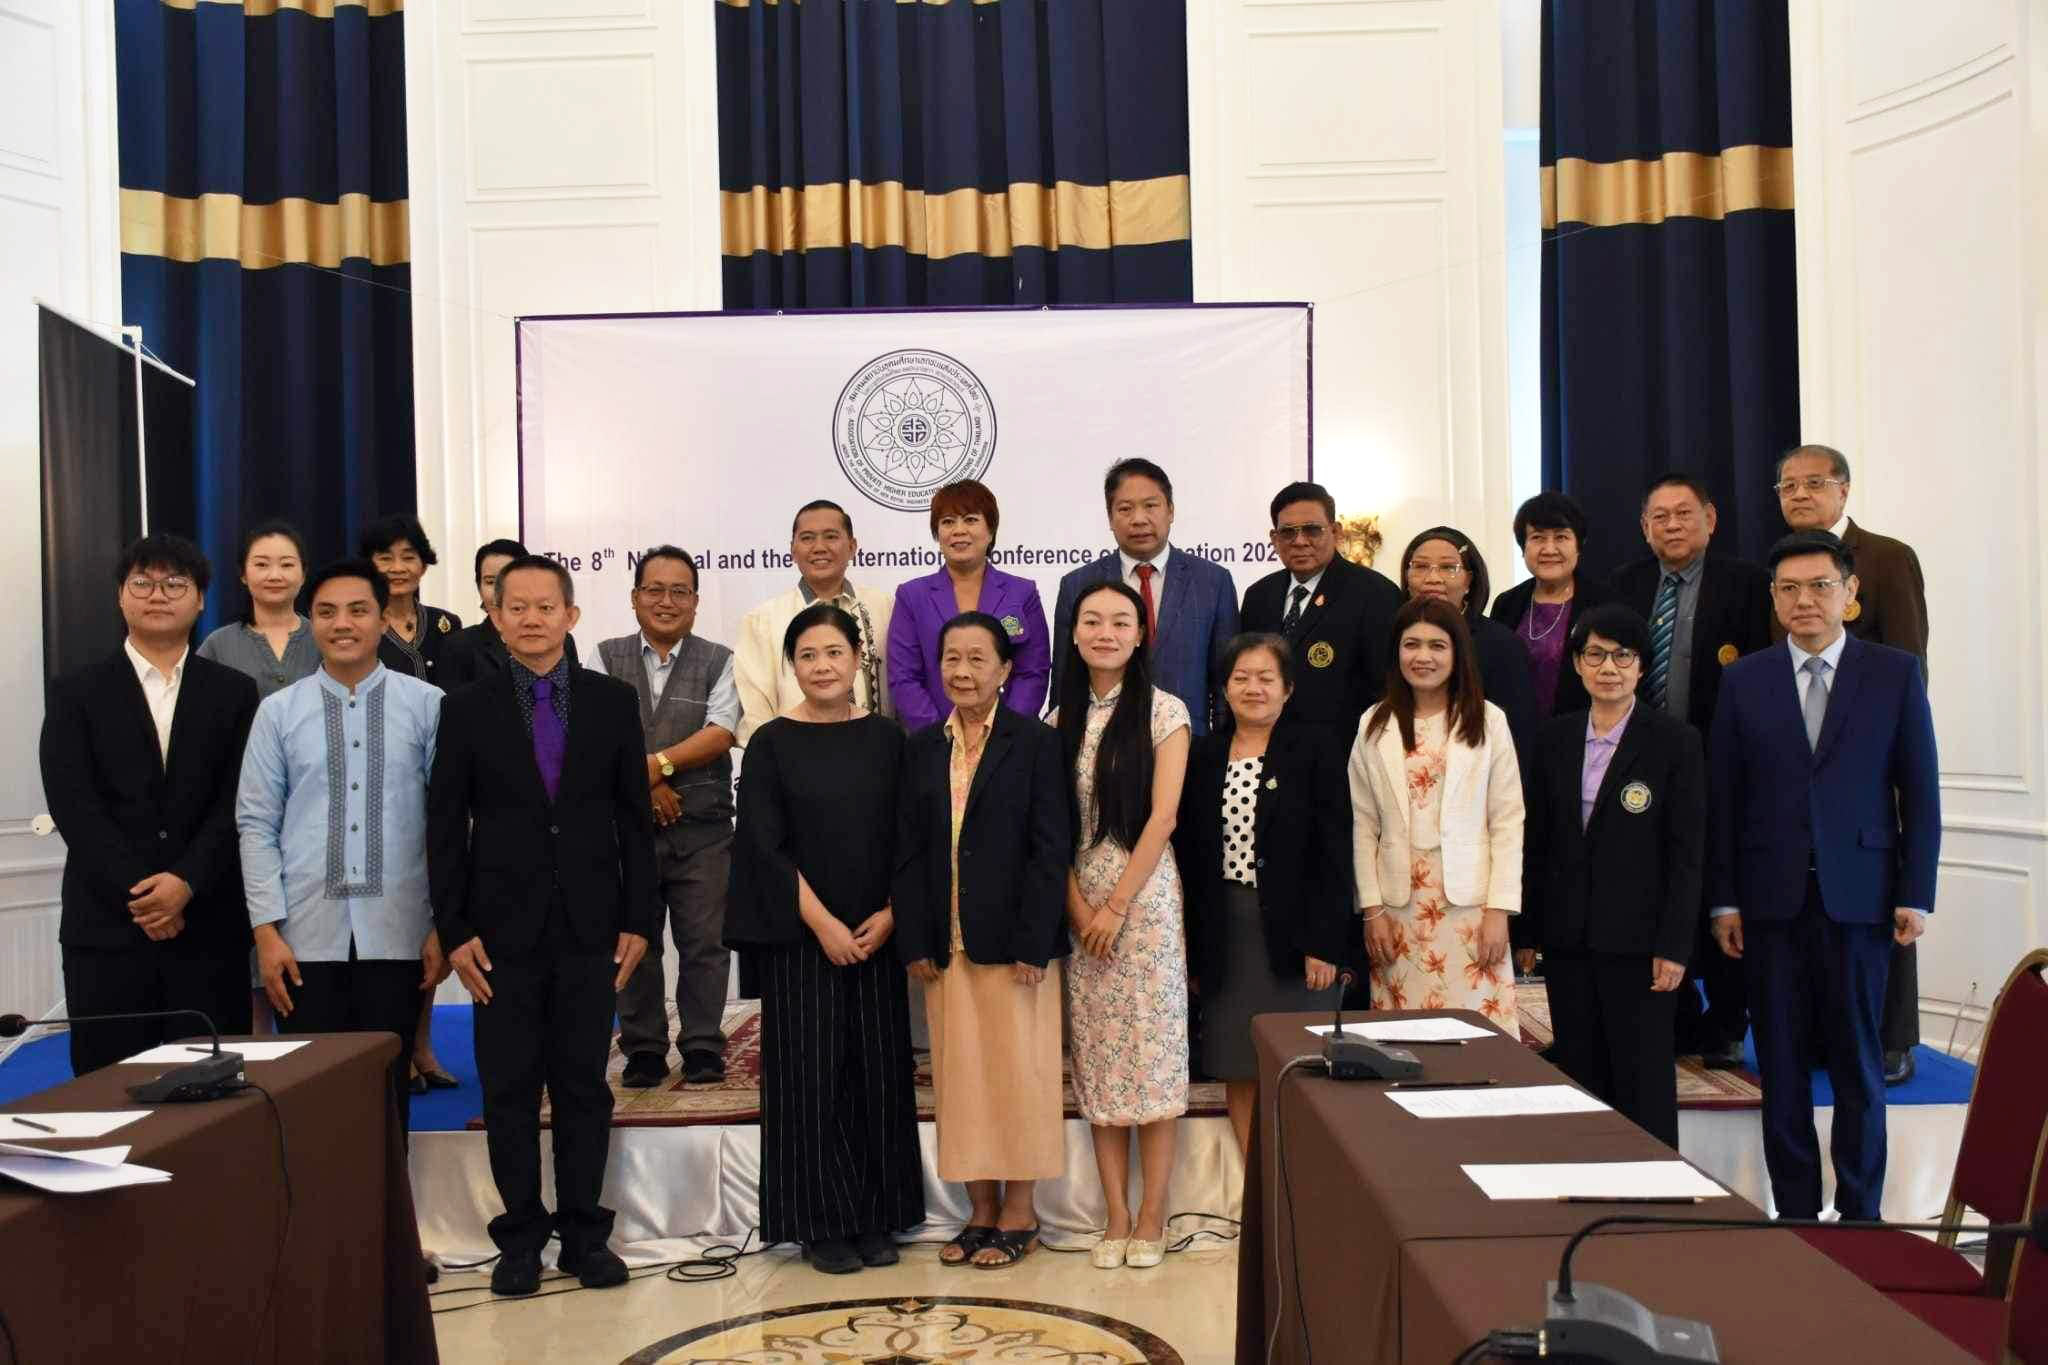 ISUFST presents at International Research Presentation at Khao Yai Province in Thailand